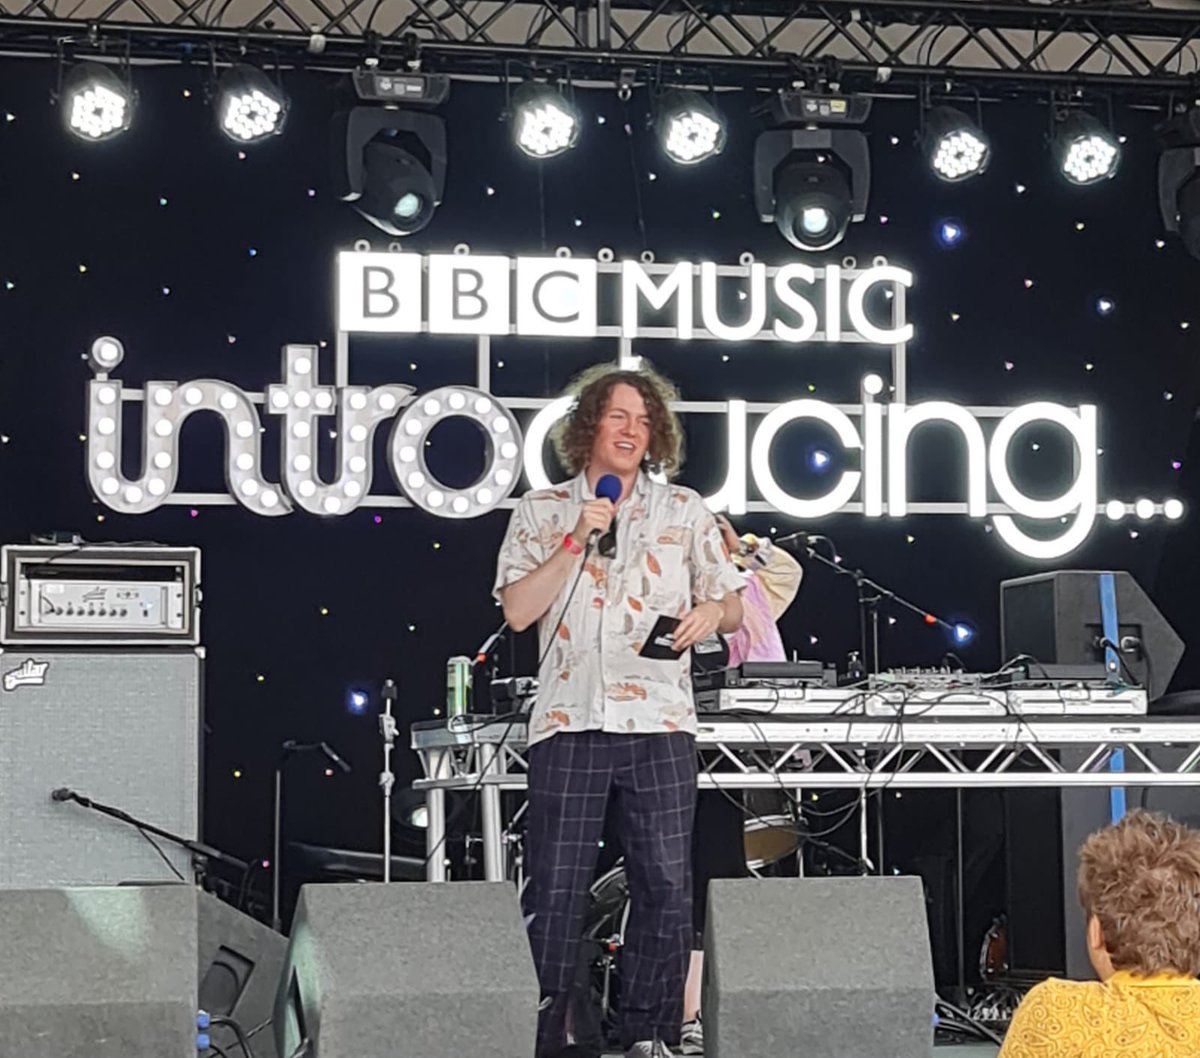 Had an incredible time hosting the @bbcintroducing stage at @OfficialRandL this weekend!! ❤️ I grew up just half an hour down the road and went to Reading every year in my late teens so to be back for work feels 🤯 Every single act blew me away - so many great moments 🤩